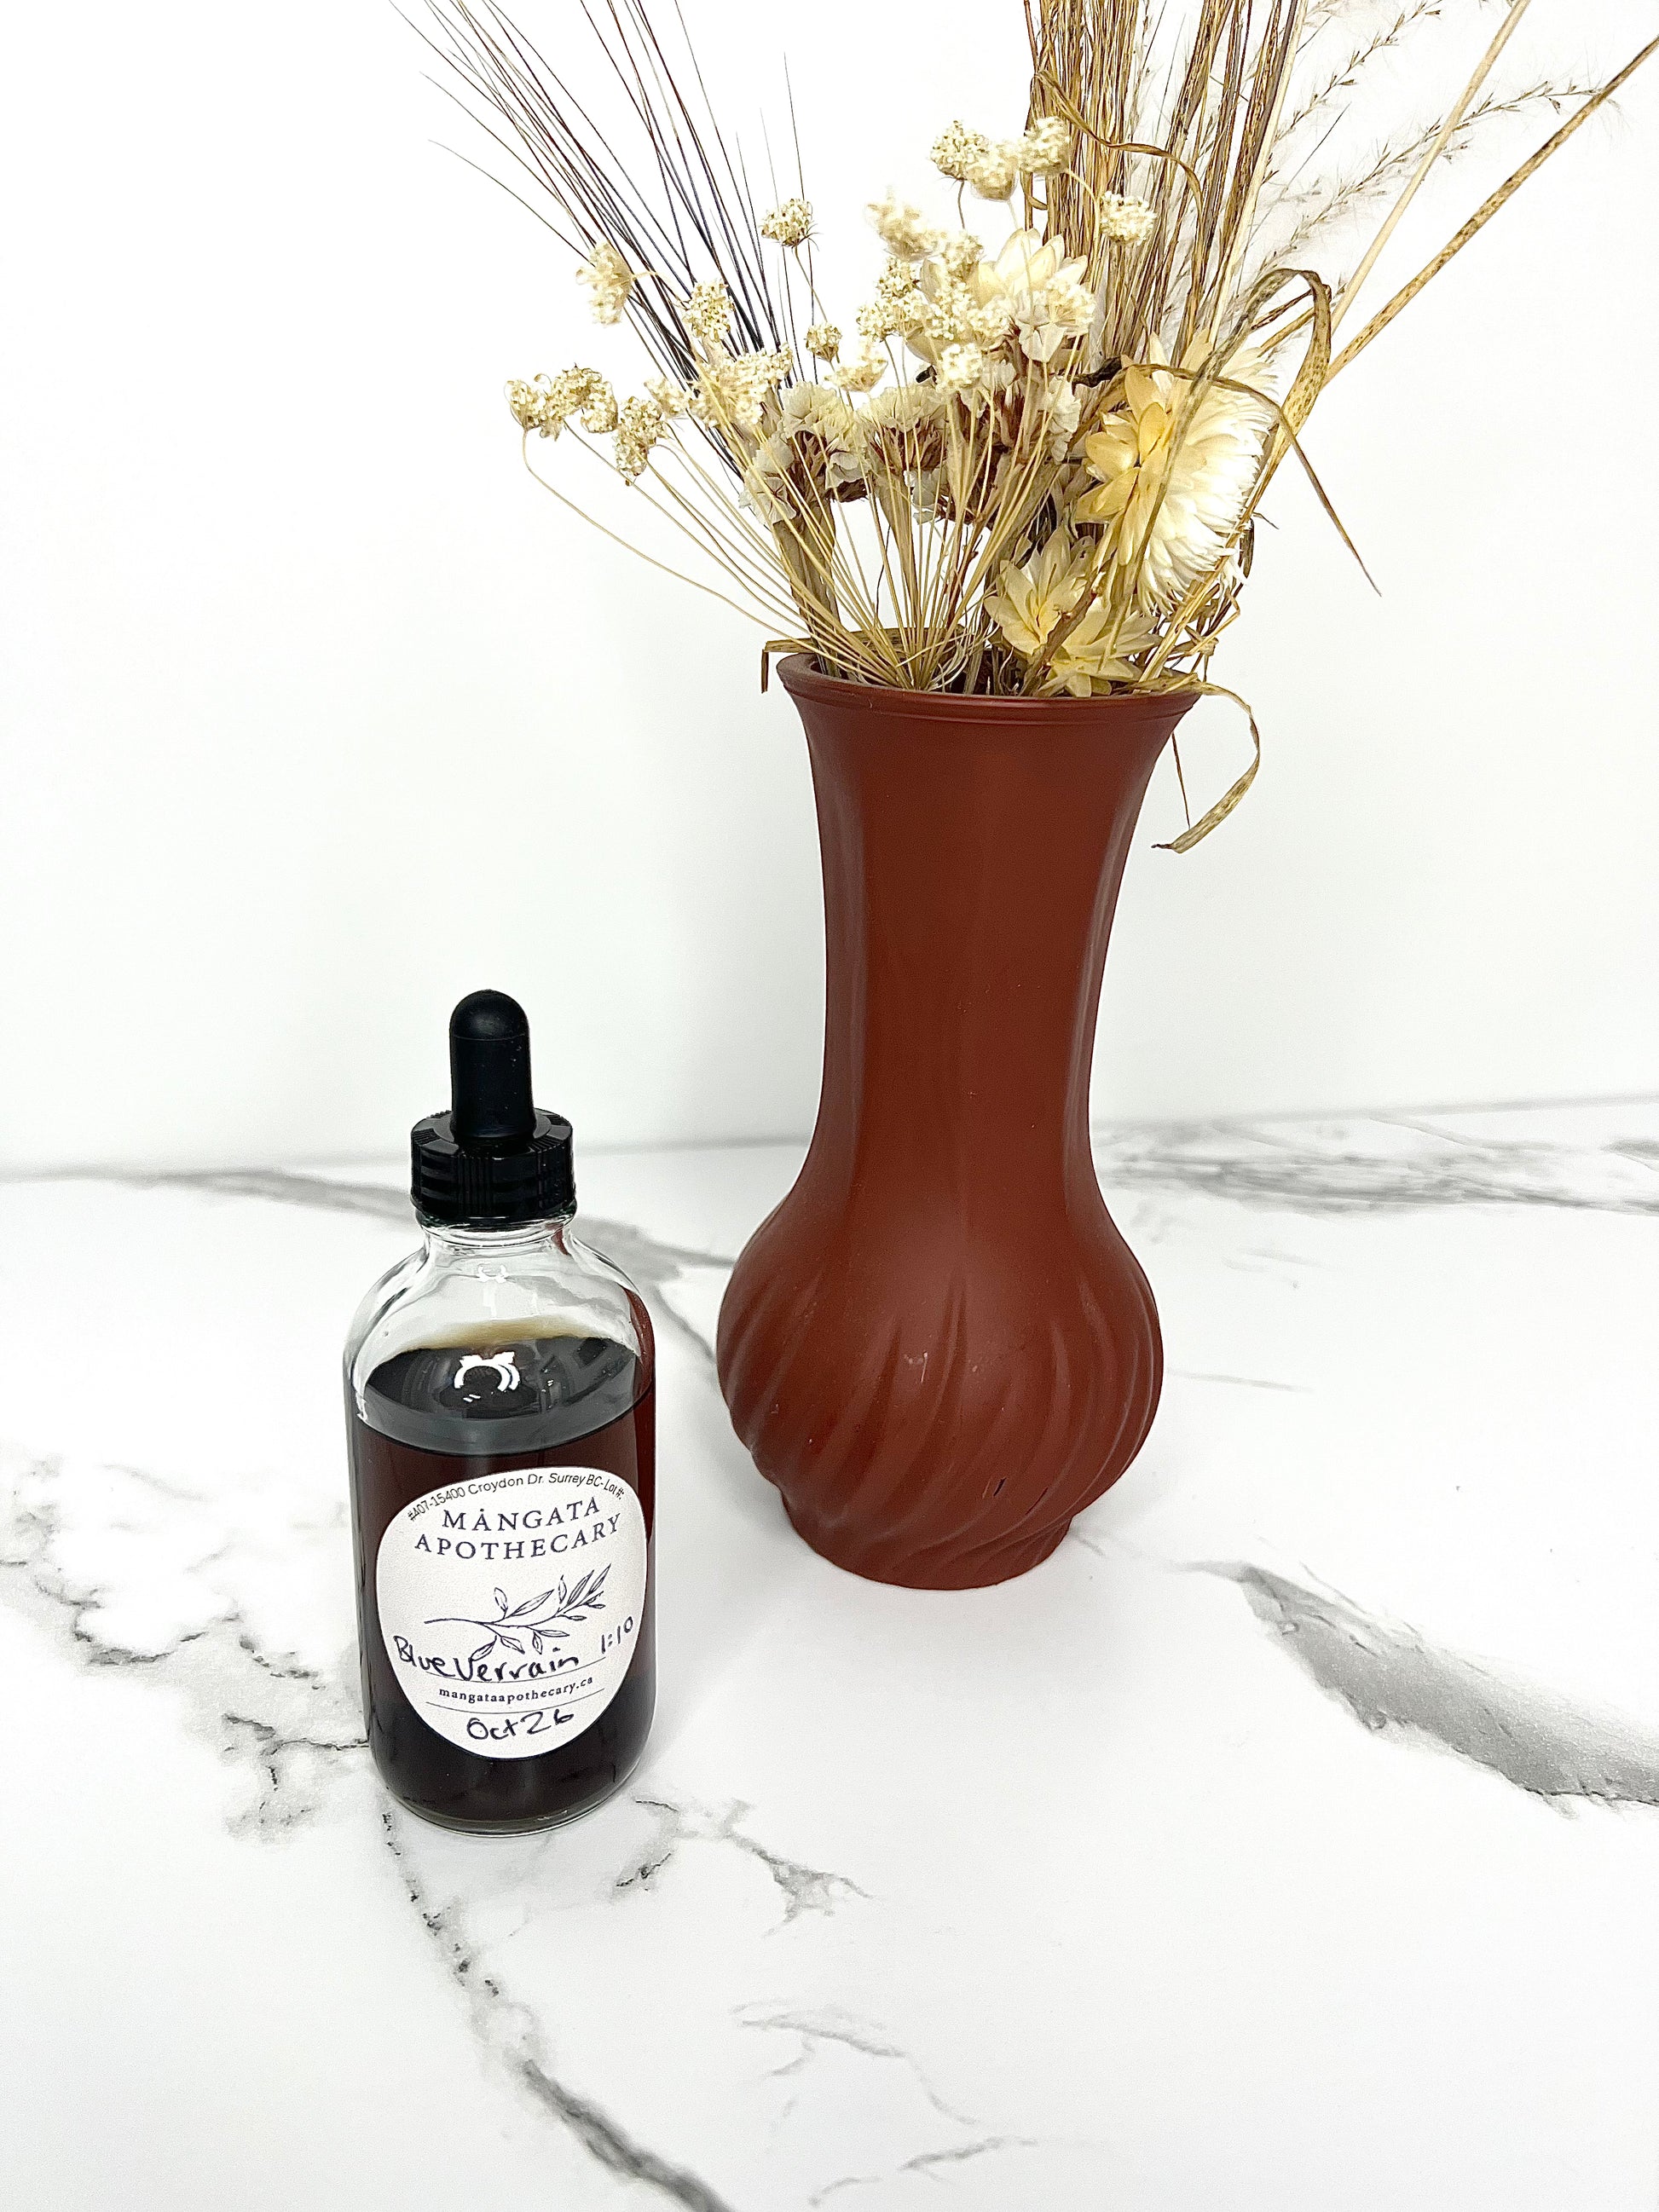 Blue Vervain Tincture - Product Image For Mangata Dispensary